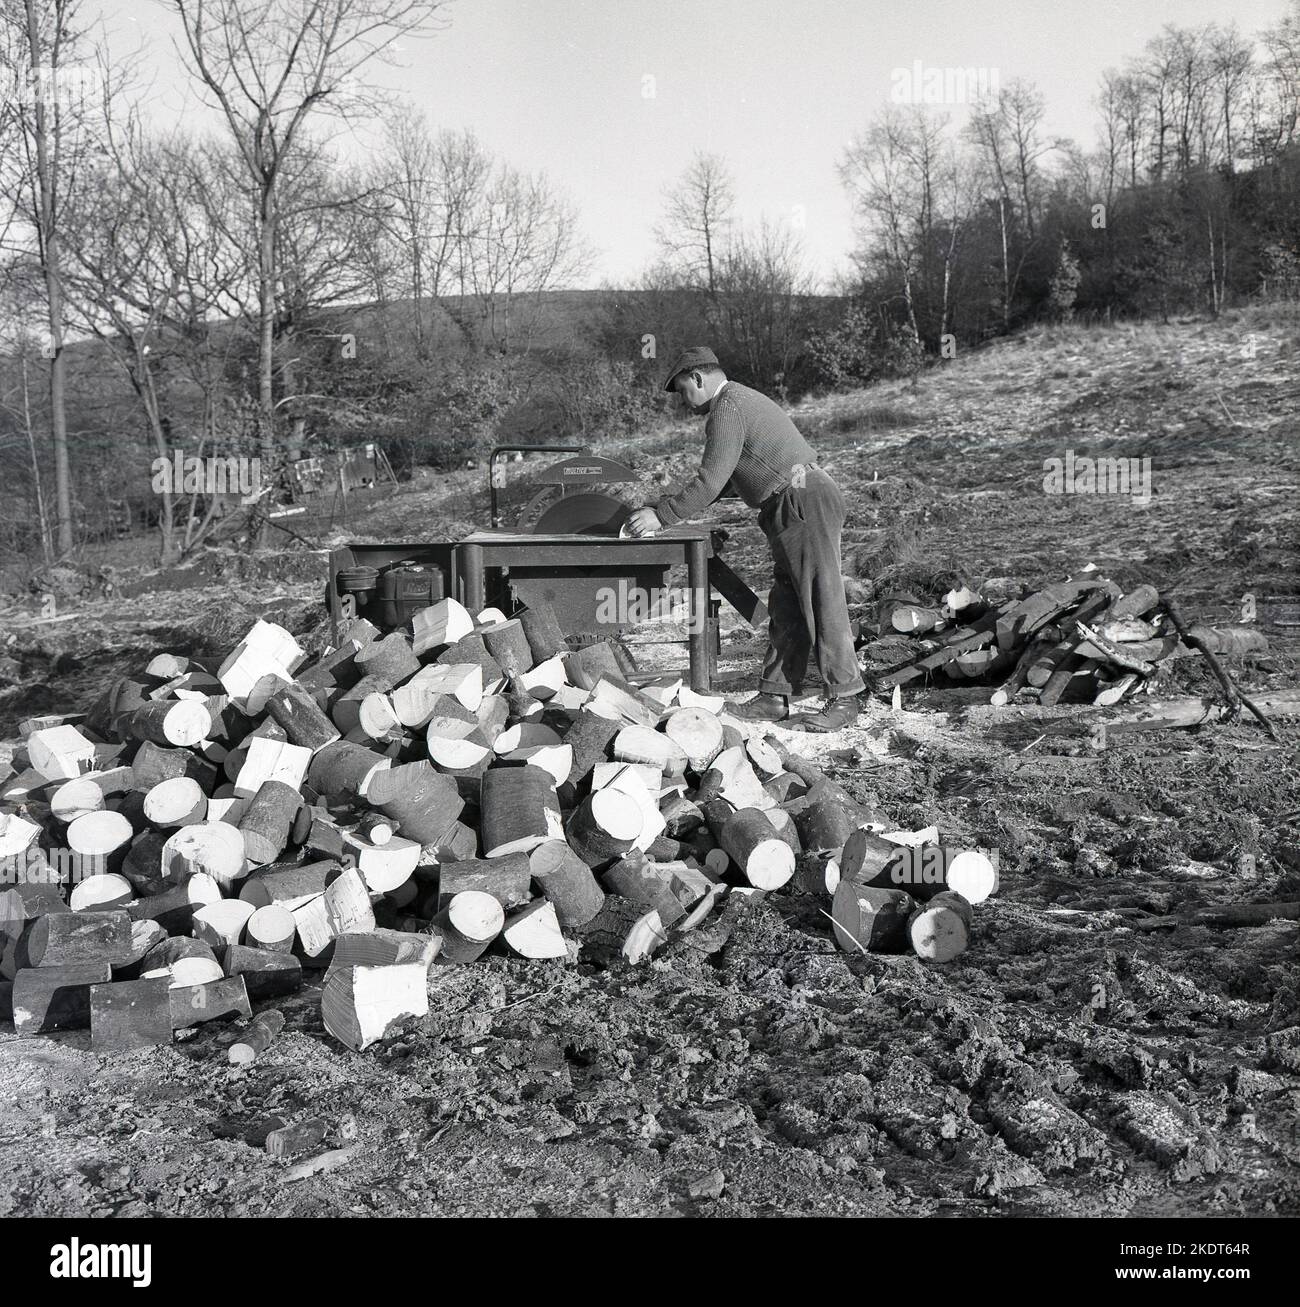 1960s, historical, wood cutting, making logs, using a Multico Master petrol driven cutting machine, England, UK. name on fuel tanks, Lister Stock Photo